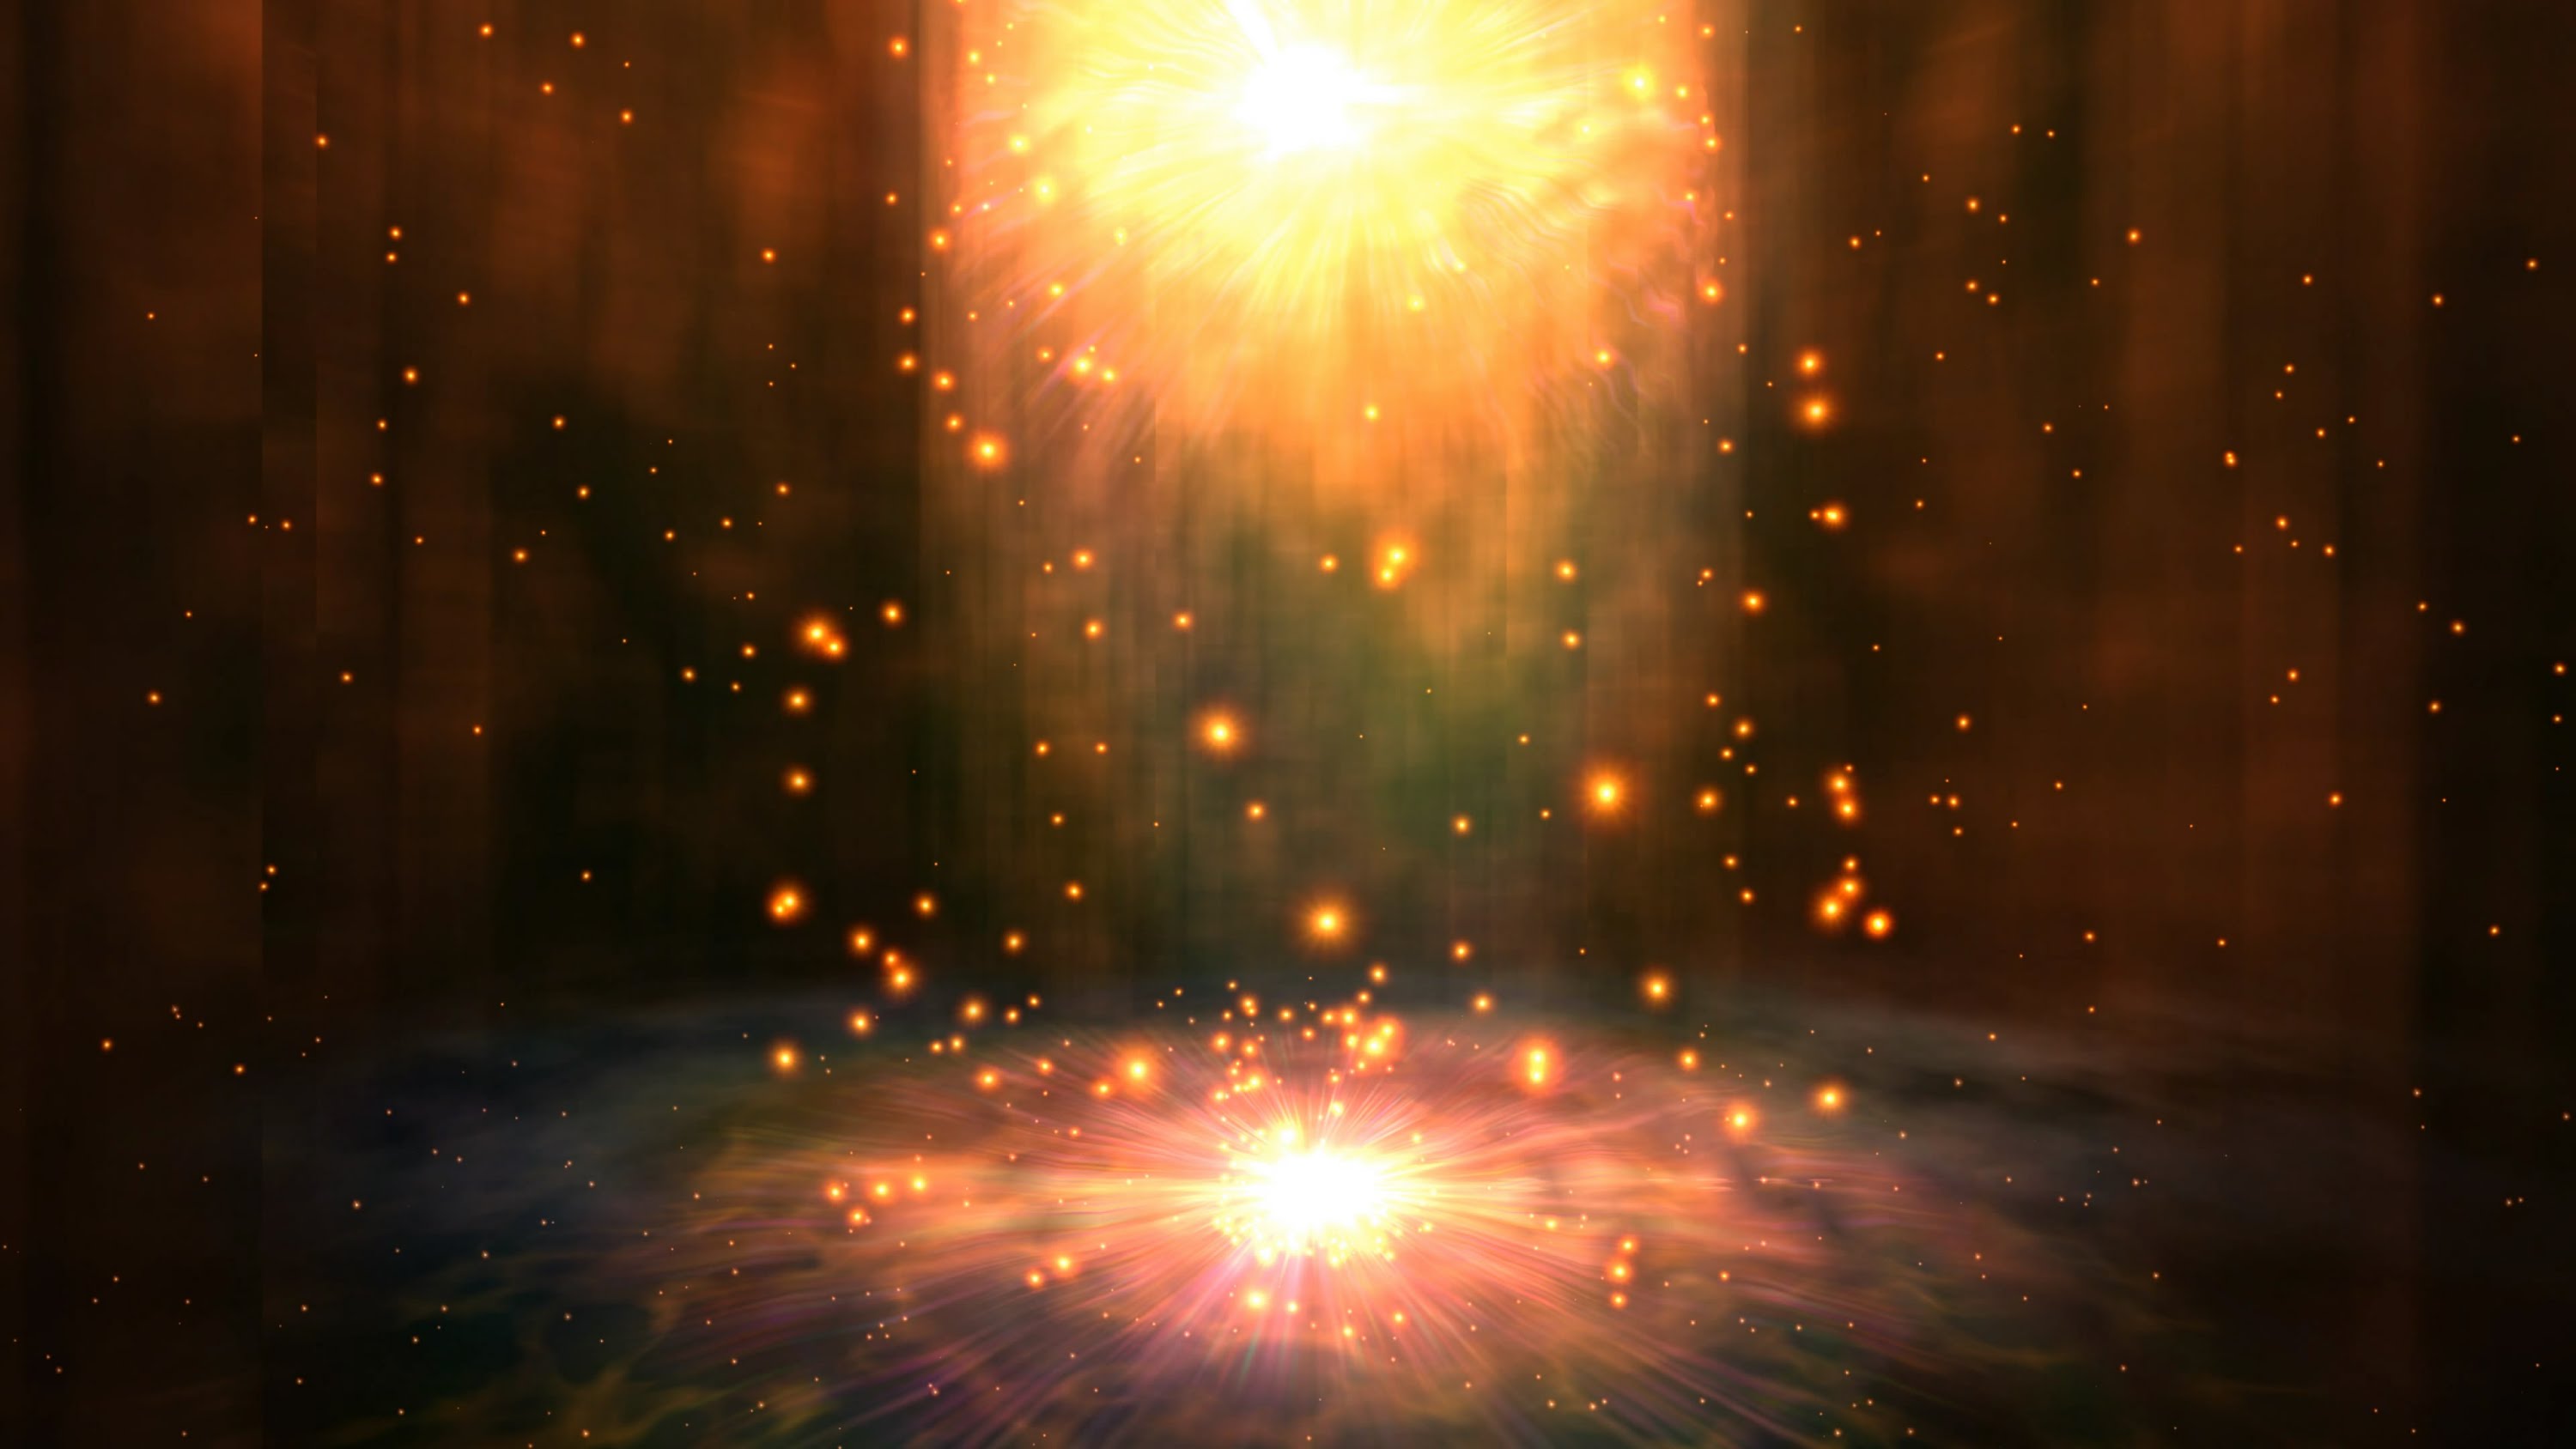 4K Magical Ground 2160p Beautiful Animated Wallpaper HD Background